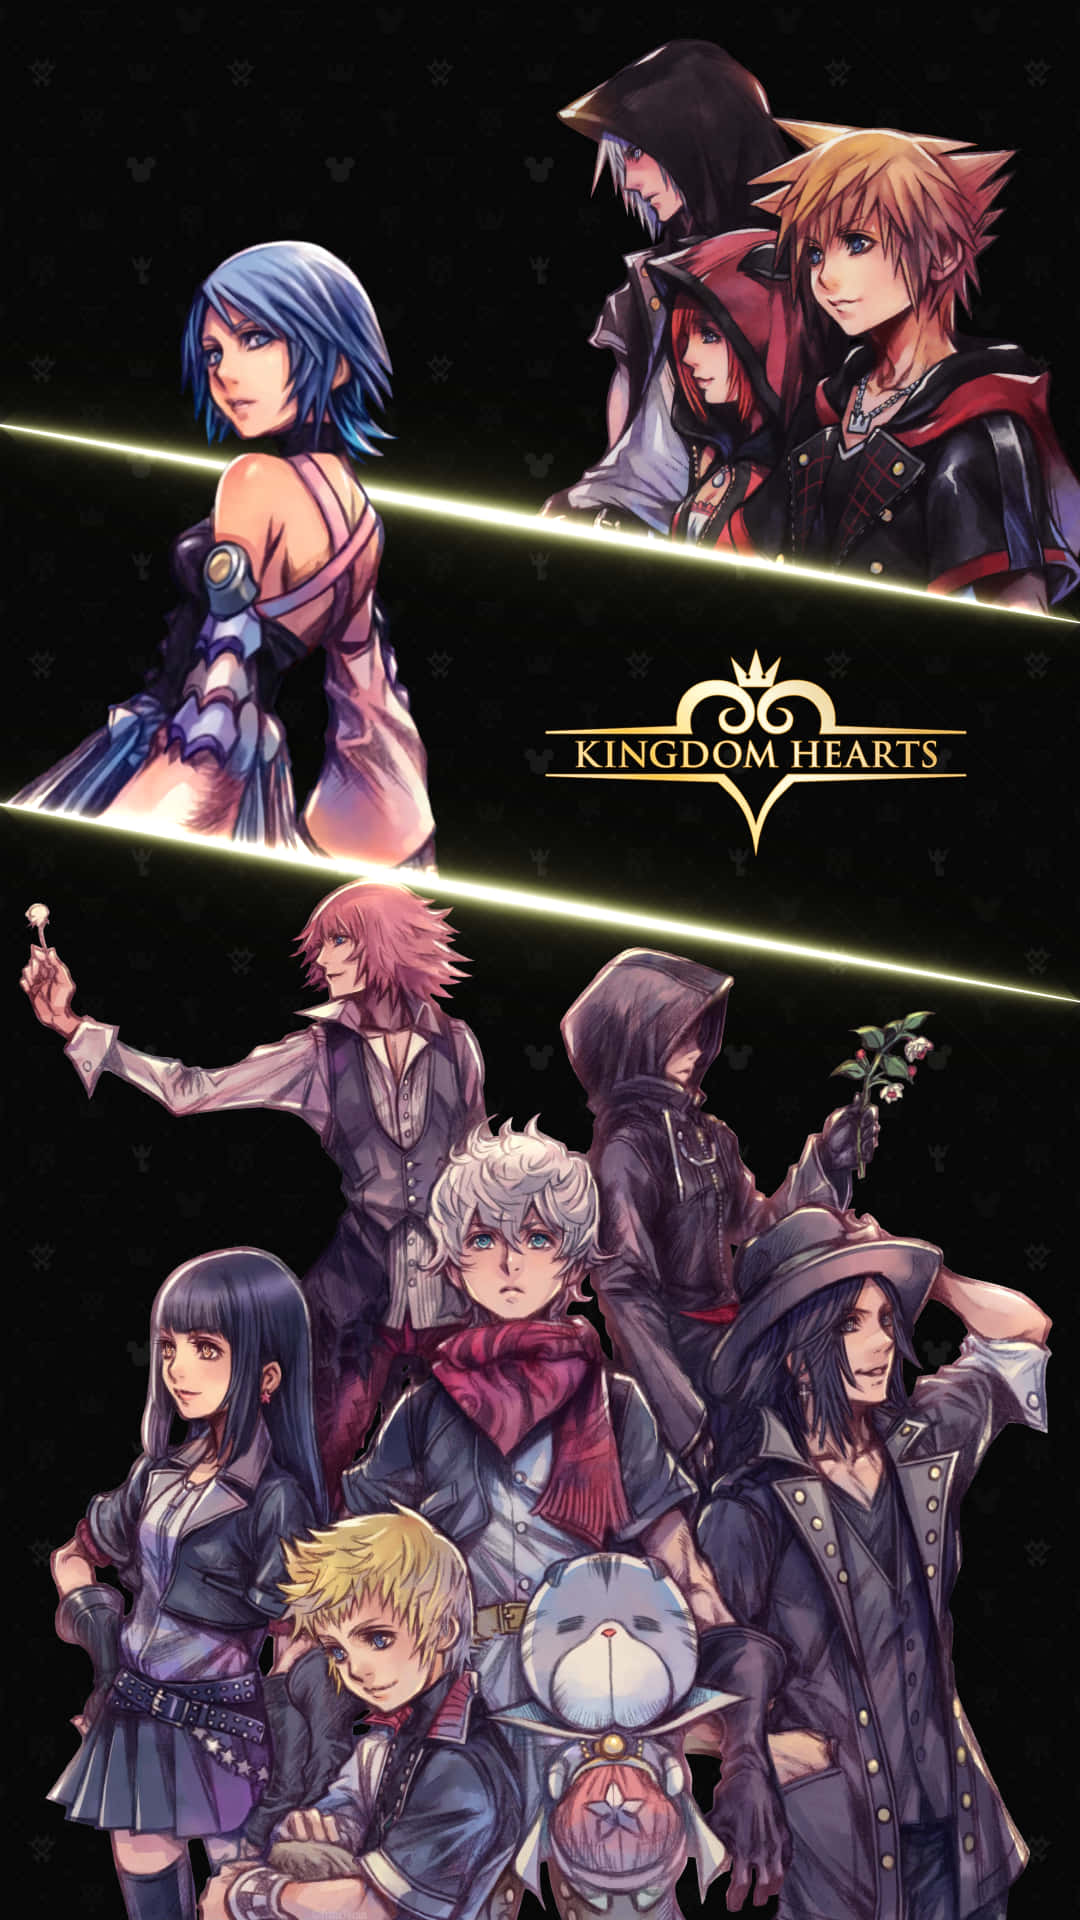 "Stay Connected To The Kingdom Hearts Universe With The Official Phone App" Wallpaper